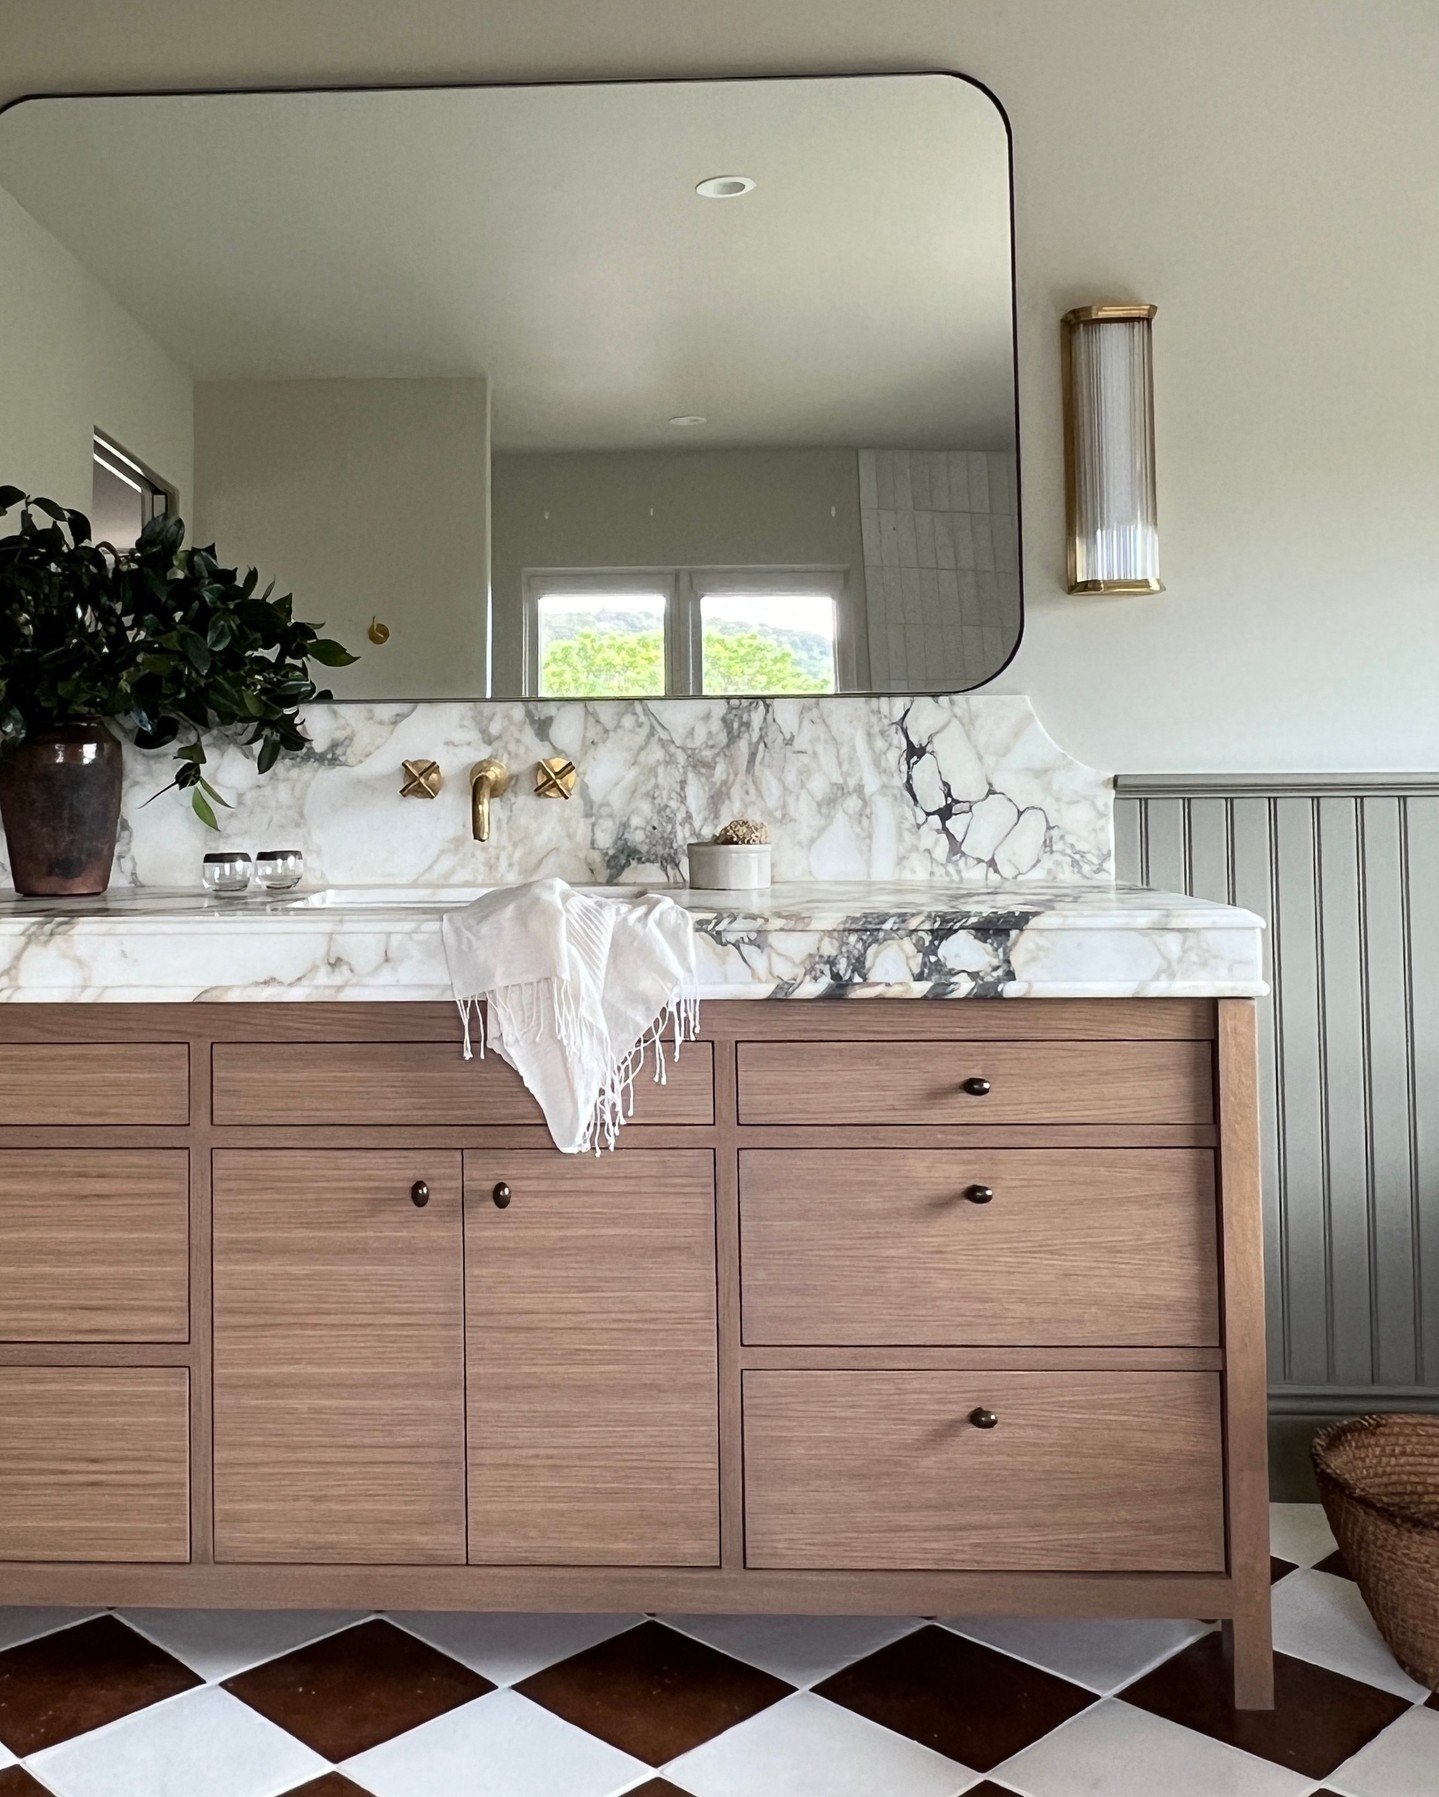 #WineCountryVilla custom vanity by RA Wilson Sonoma Cabinetry Shop. We chose a custom stained Oak Inset style flat panel door which was a compliment to our detailed Calacatta Monet marble counter edge. That counter is a FAVORITE detail on this projec